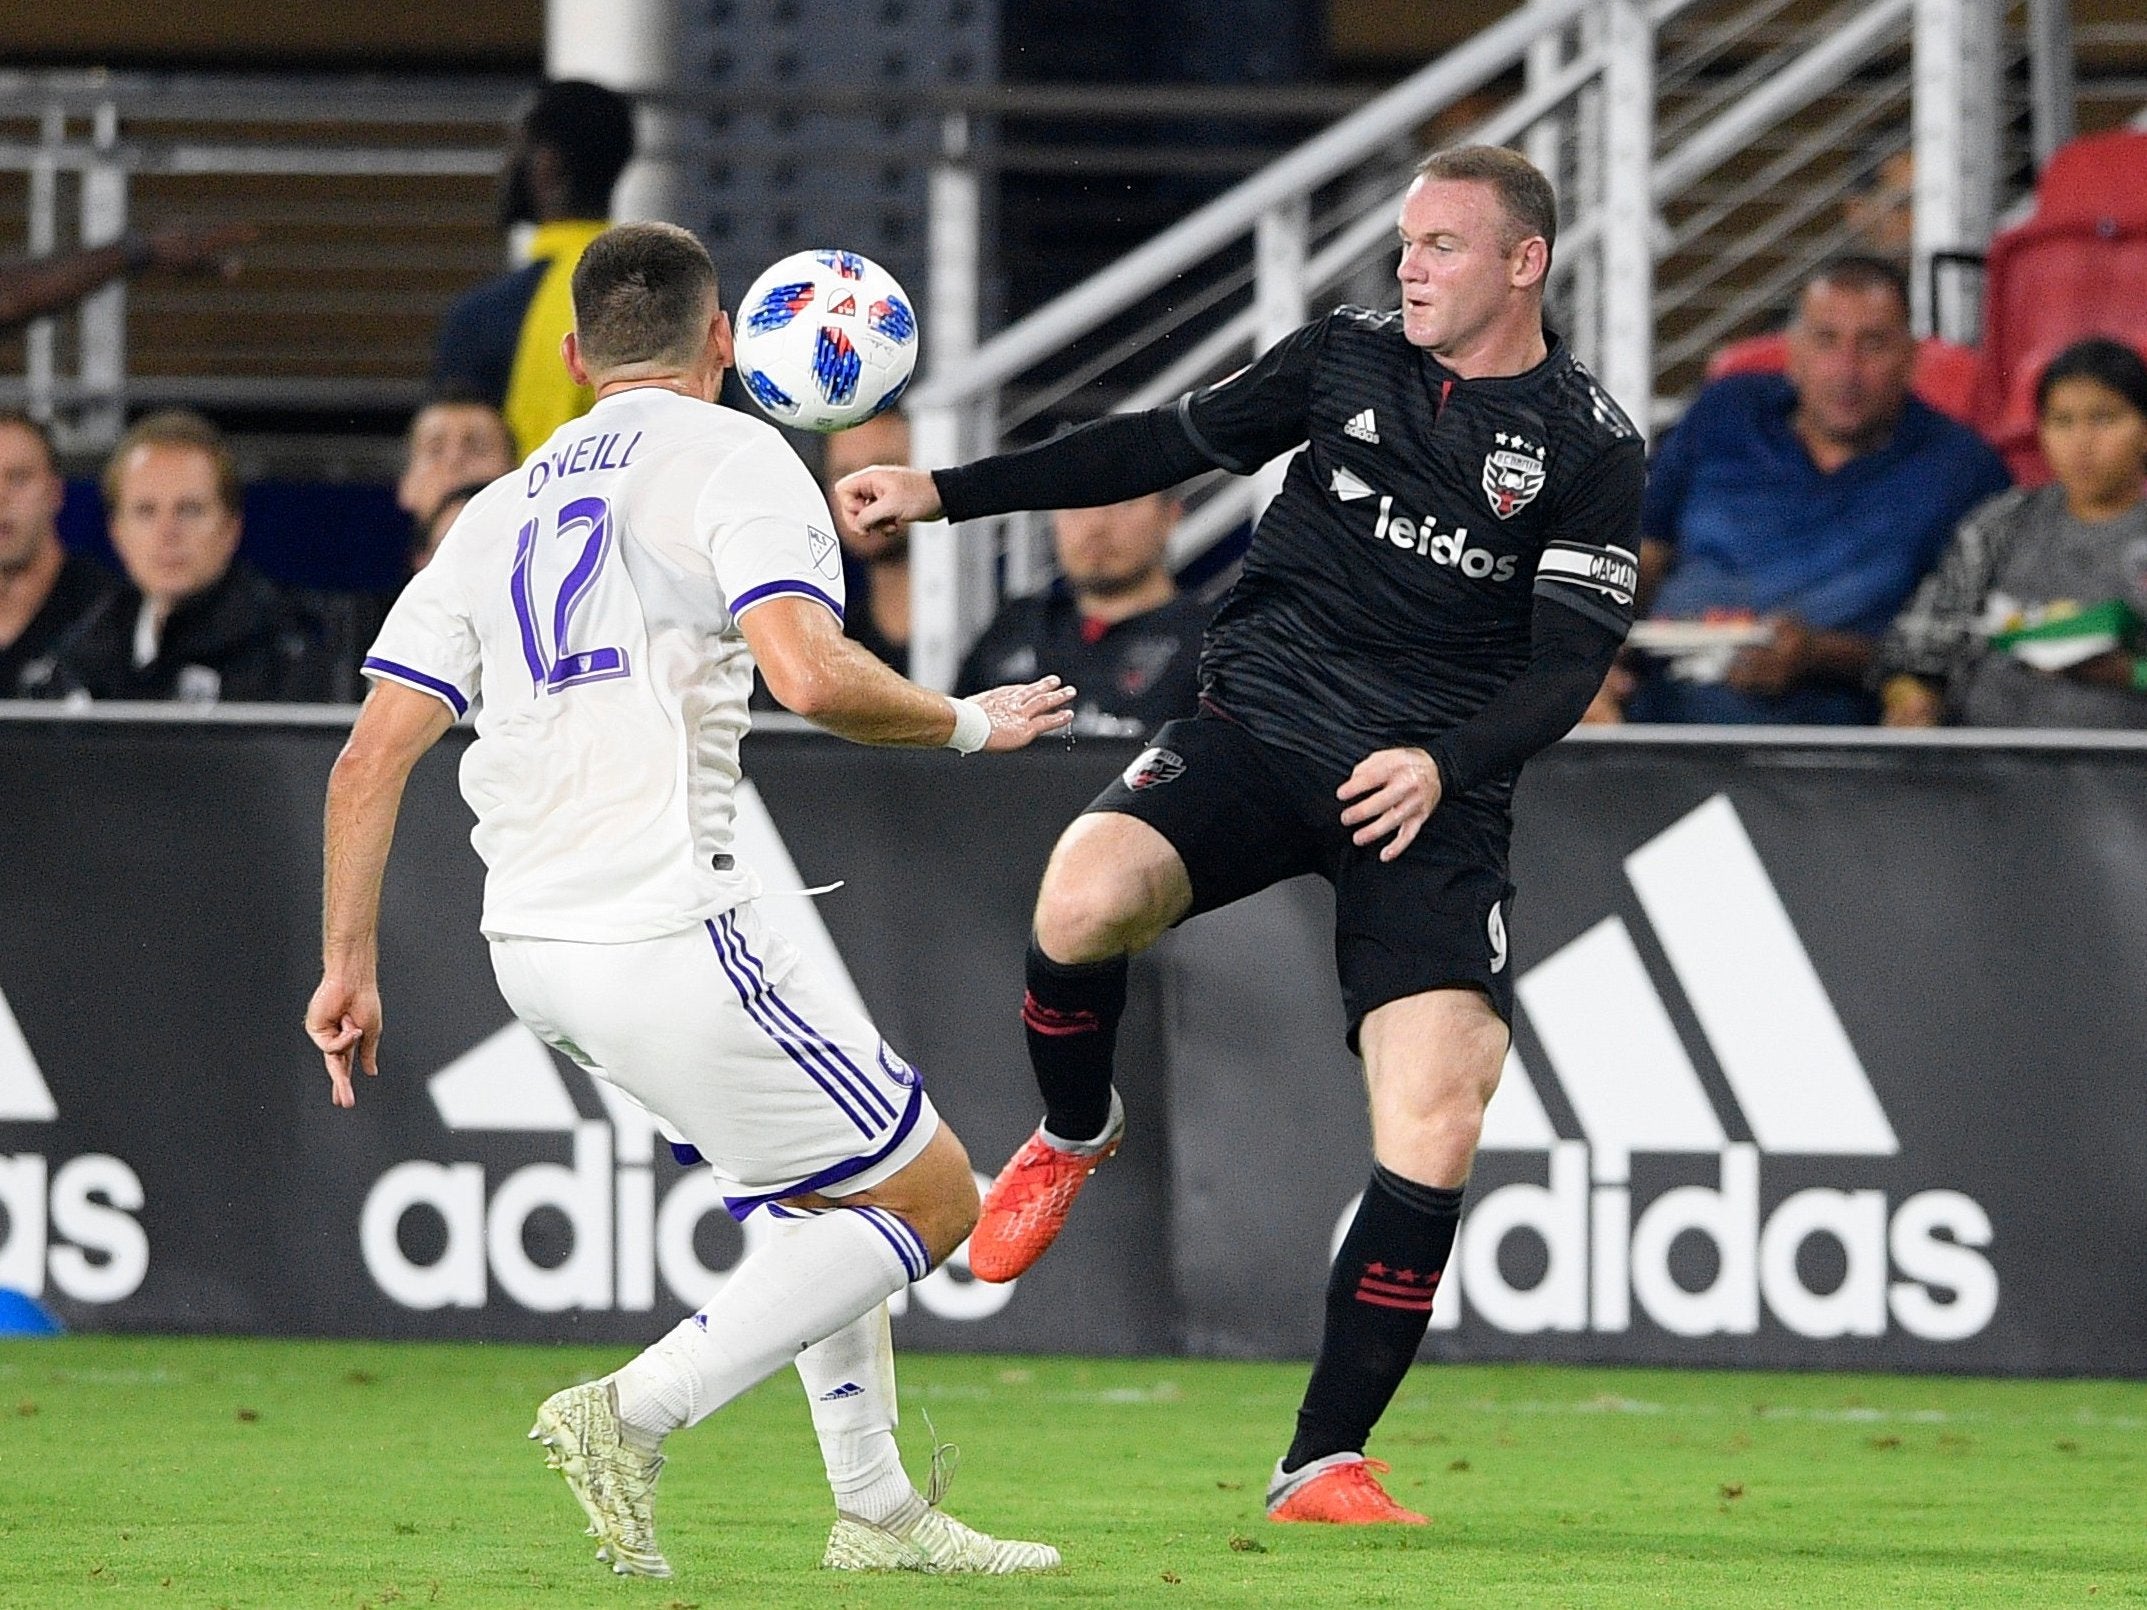 Wayne Rooney's assist gave DC United a 96th-minute winner to beat Orlando City 3-2